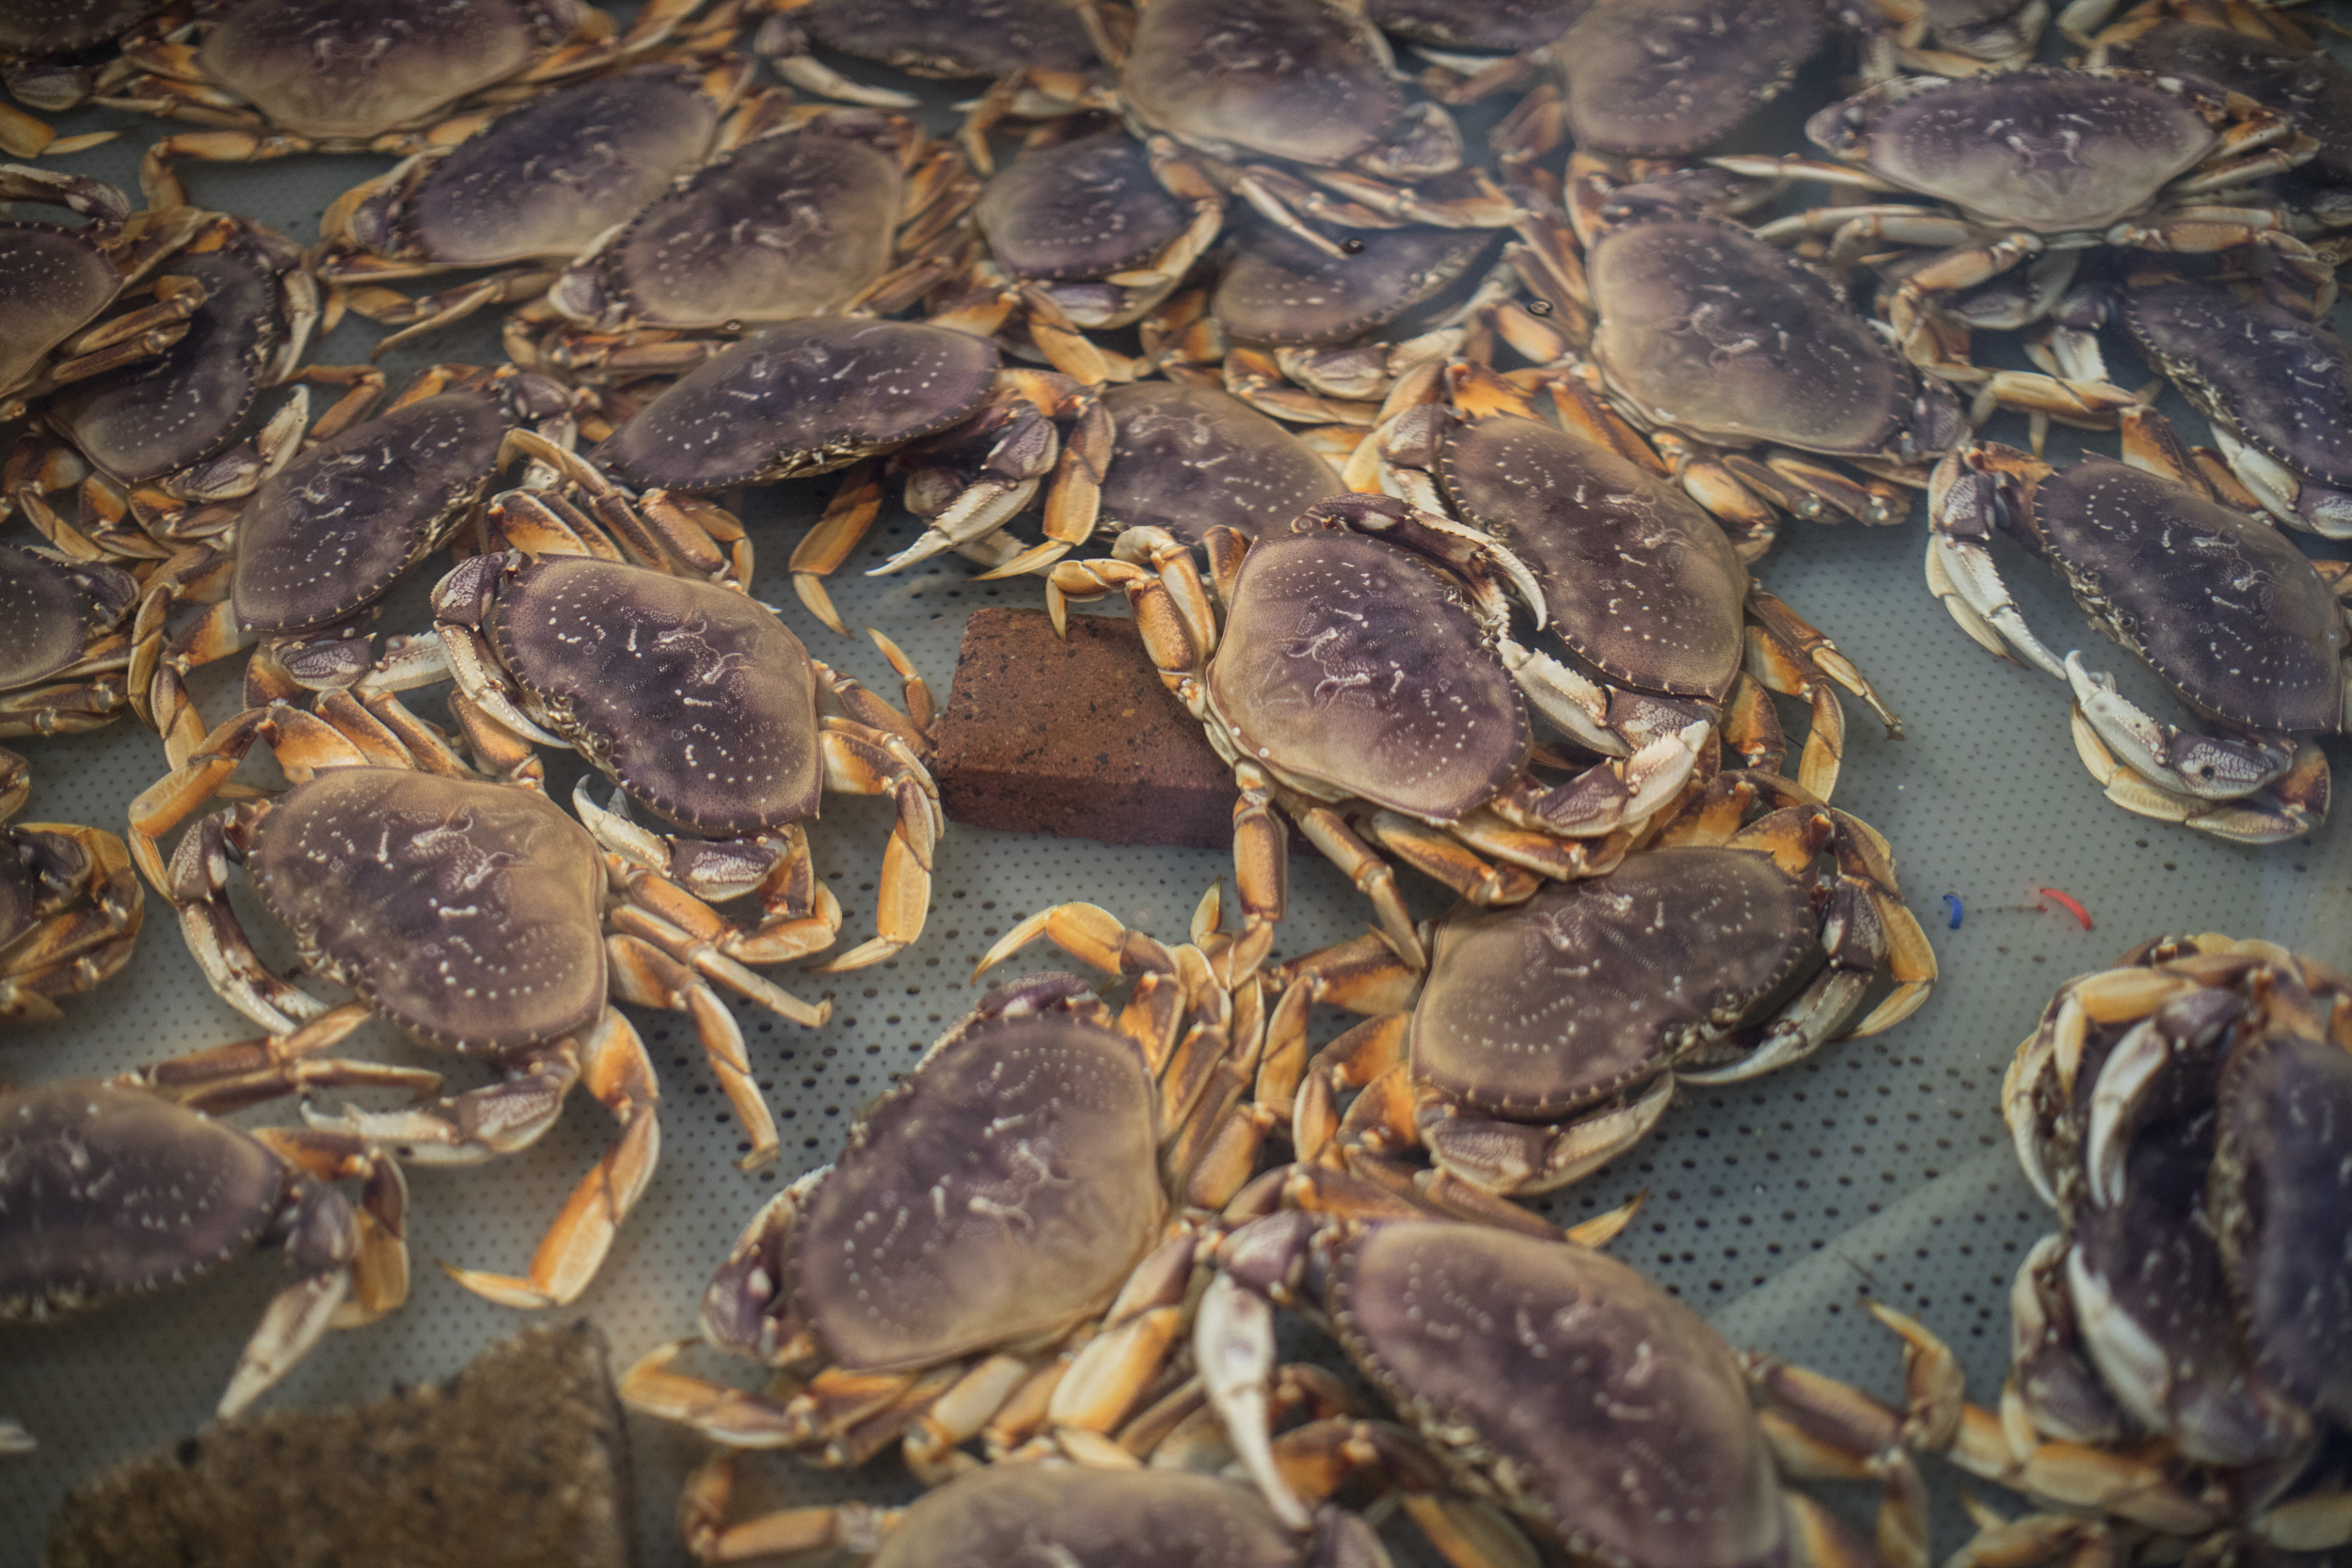 Blue crab seen at Hanthorn Crab Company on Historic Pier 39 in Astoria. 